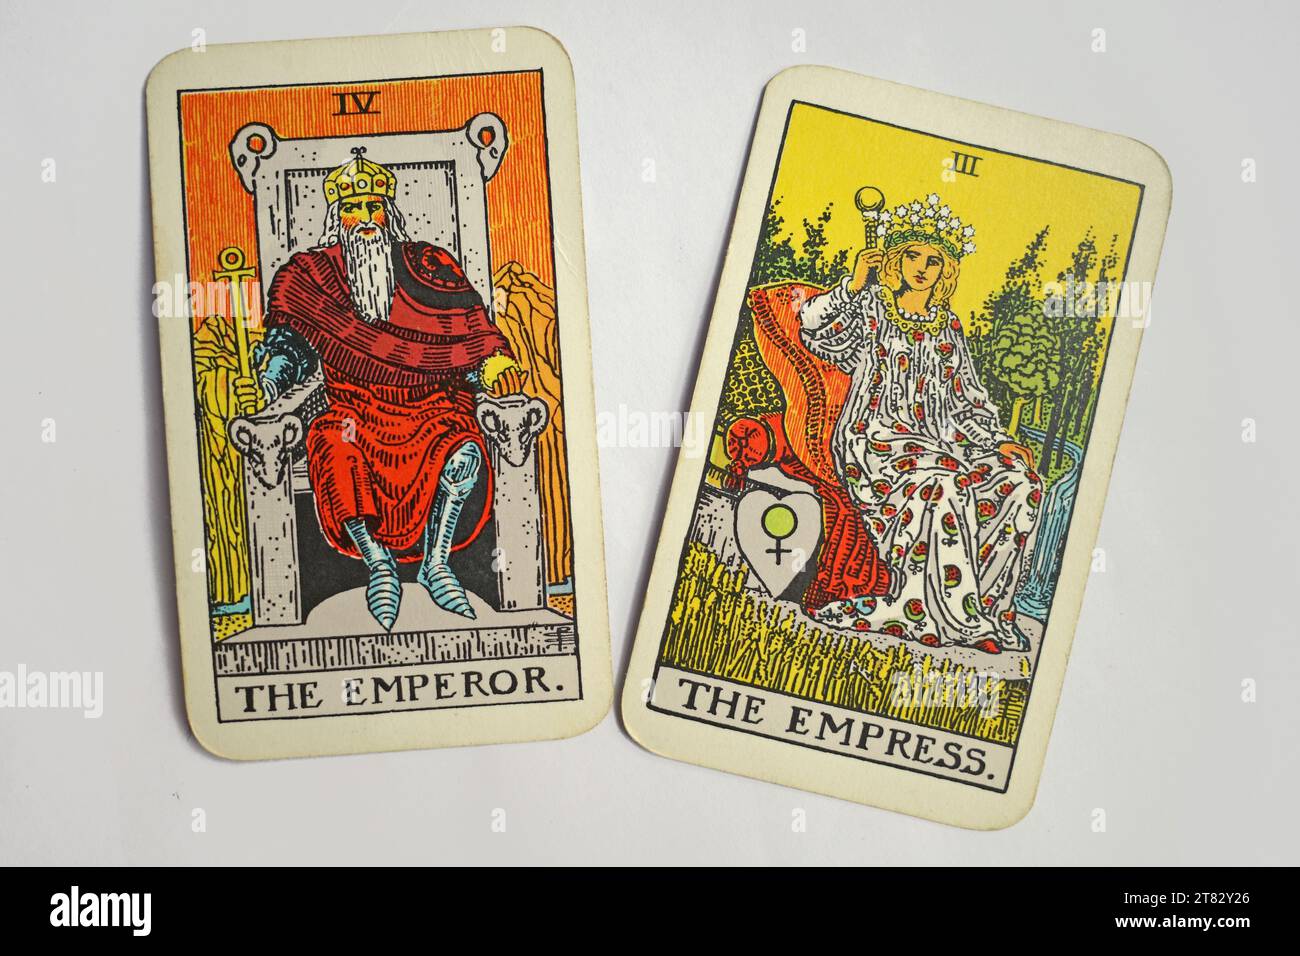 The Emperor and the Empress. Two Rider Waite tarot cards from the Major Arcana Stock Photo